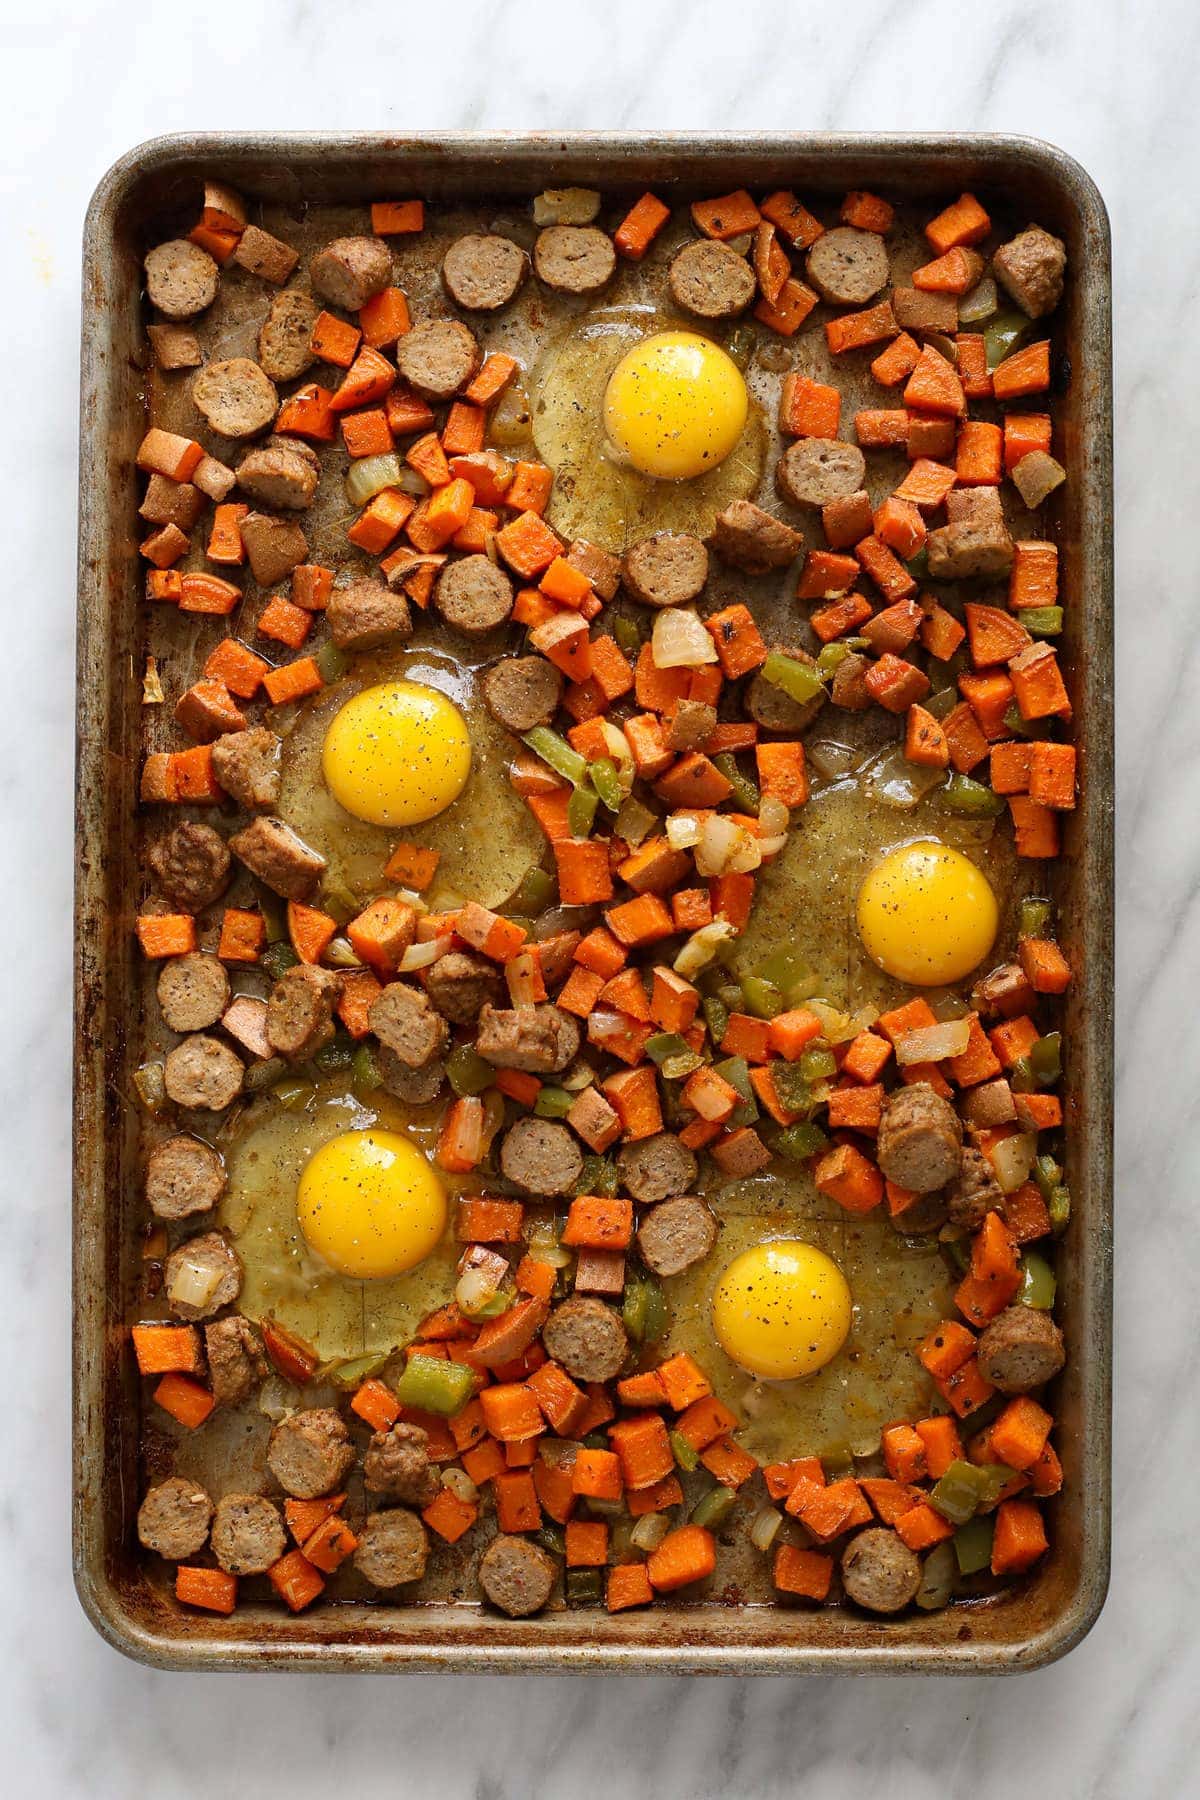 sweet potato nests with raw eggs cracked into them on sheet pan.